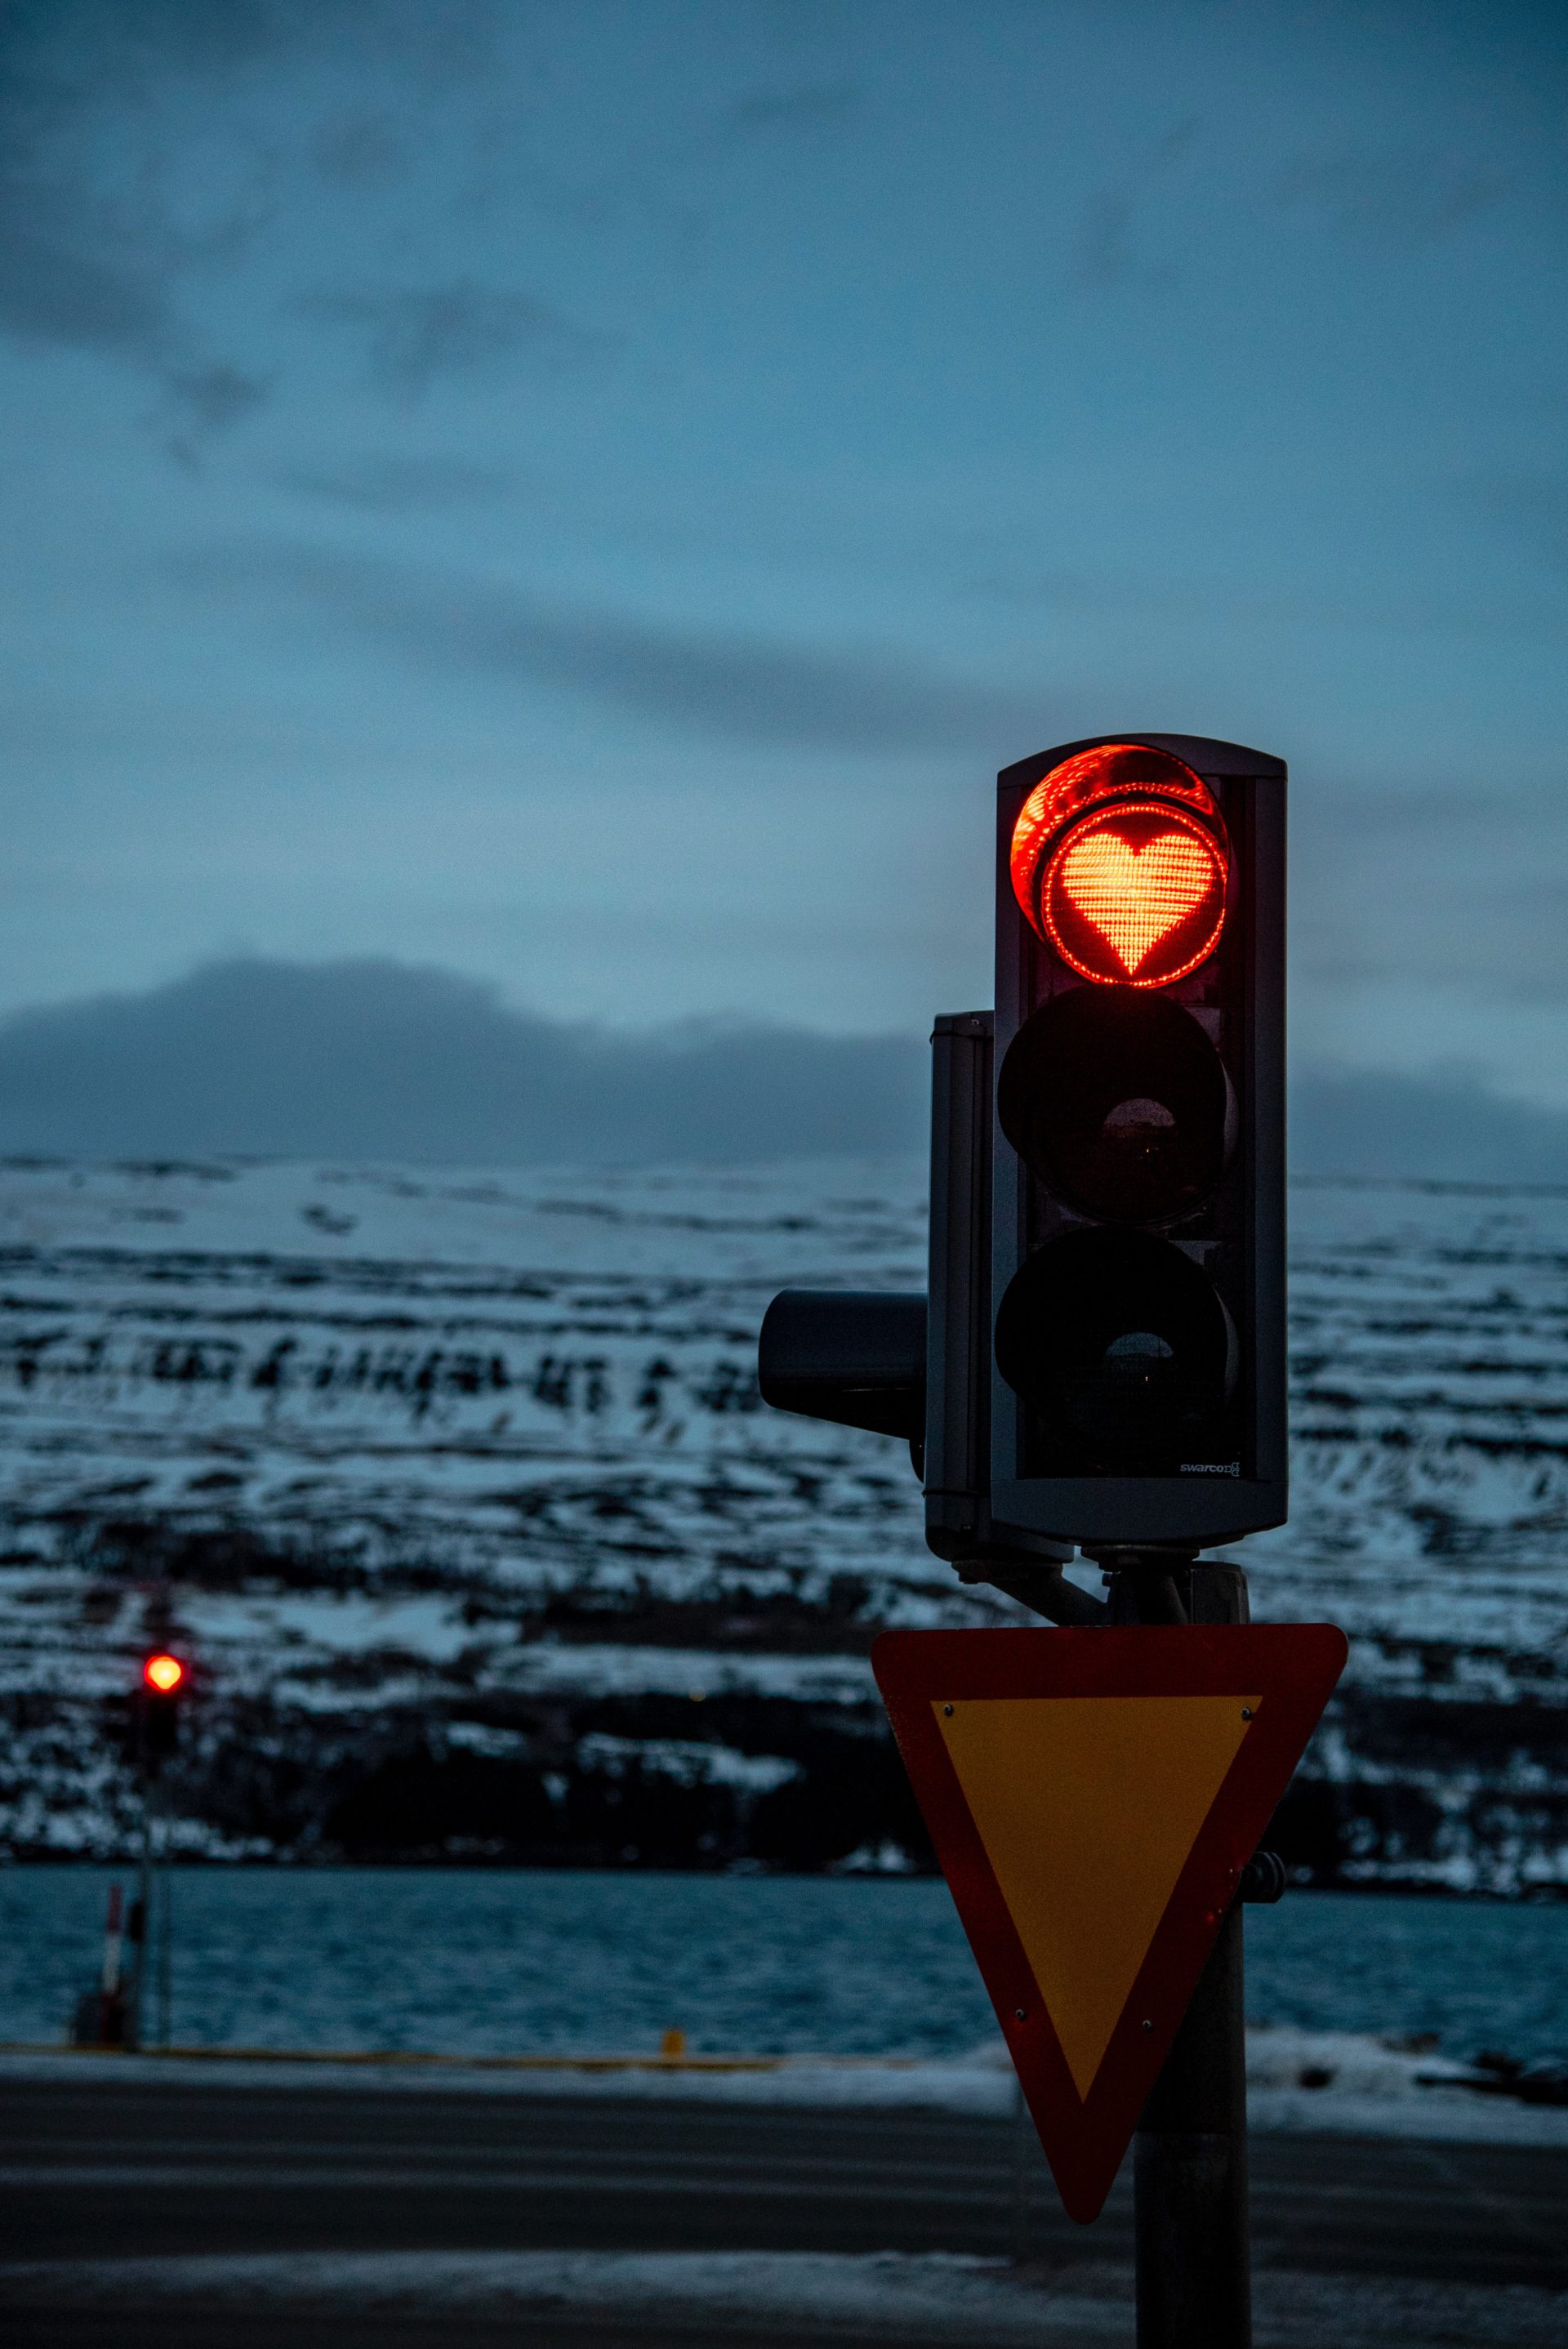 image showing a traffic red light with the shape of a red heart